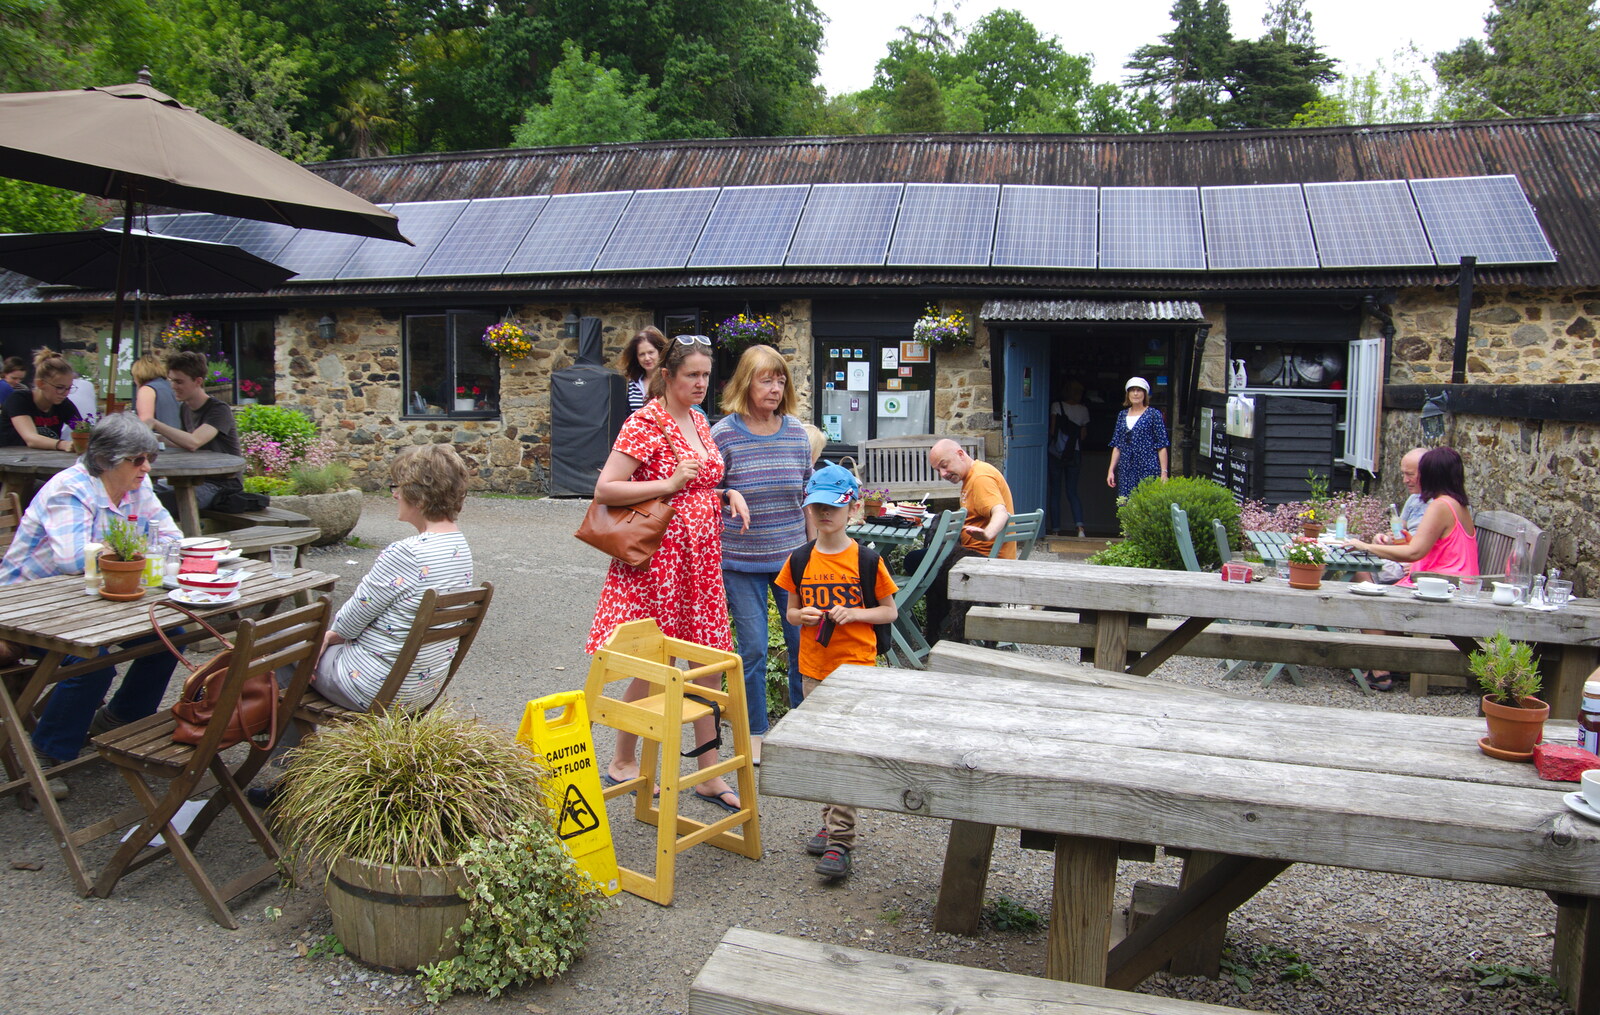 In the café courtyard from Chagford Lido and a Trip to Parke, Bovey Tracey, Devon - 25th May 2019